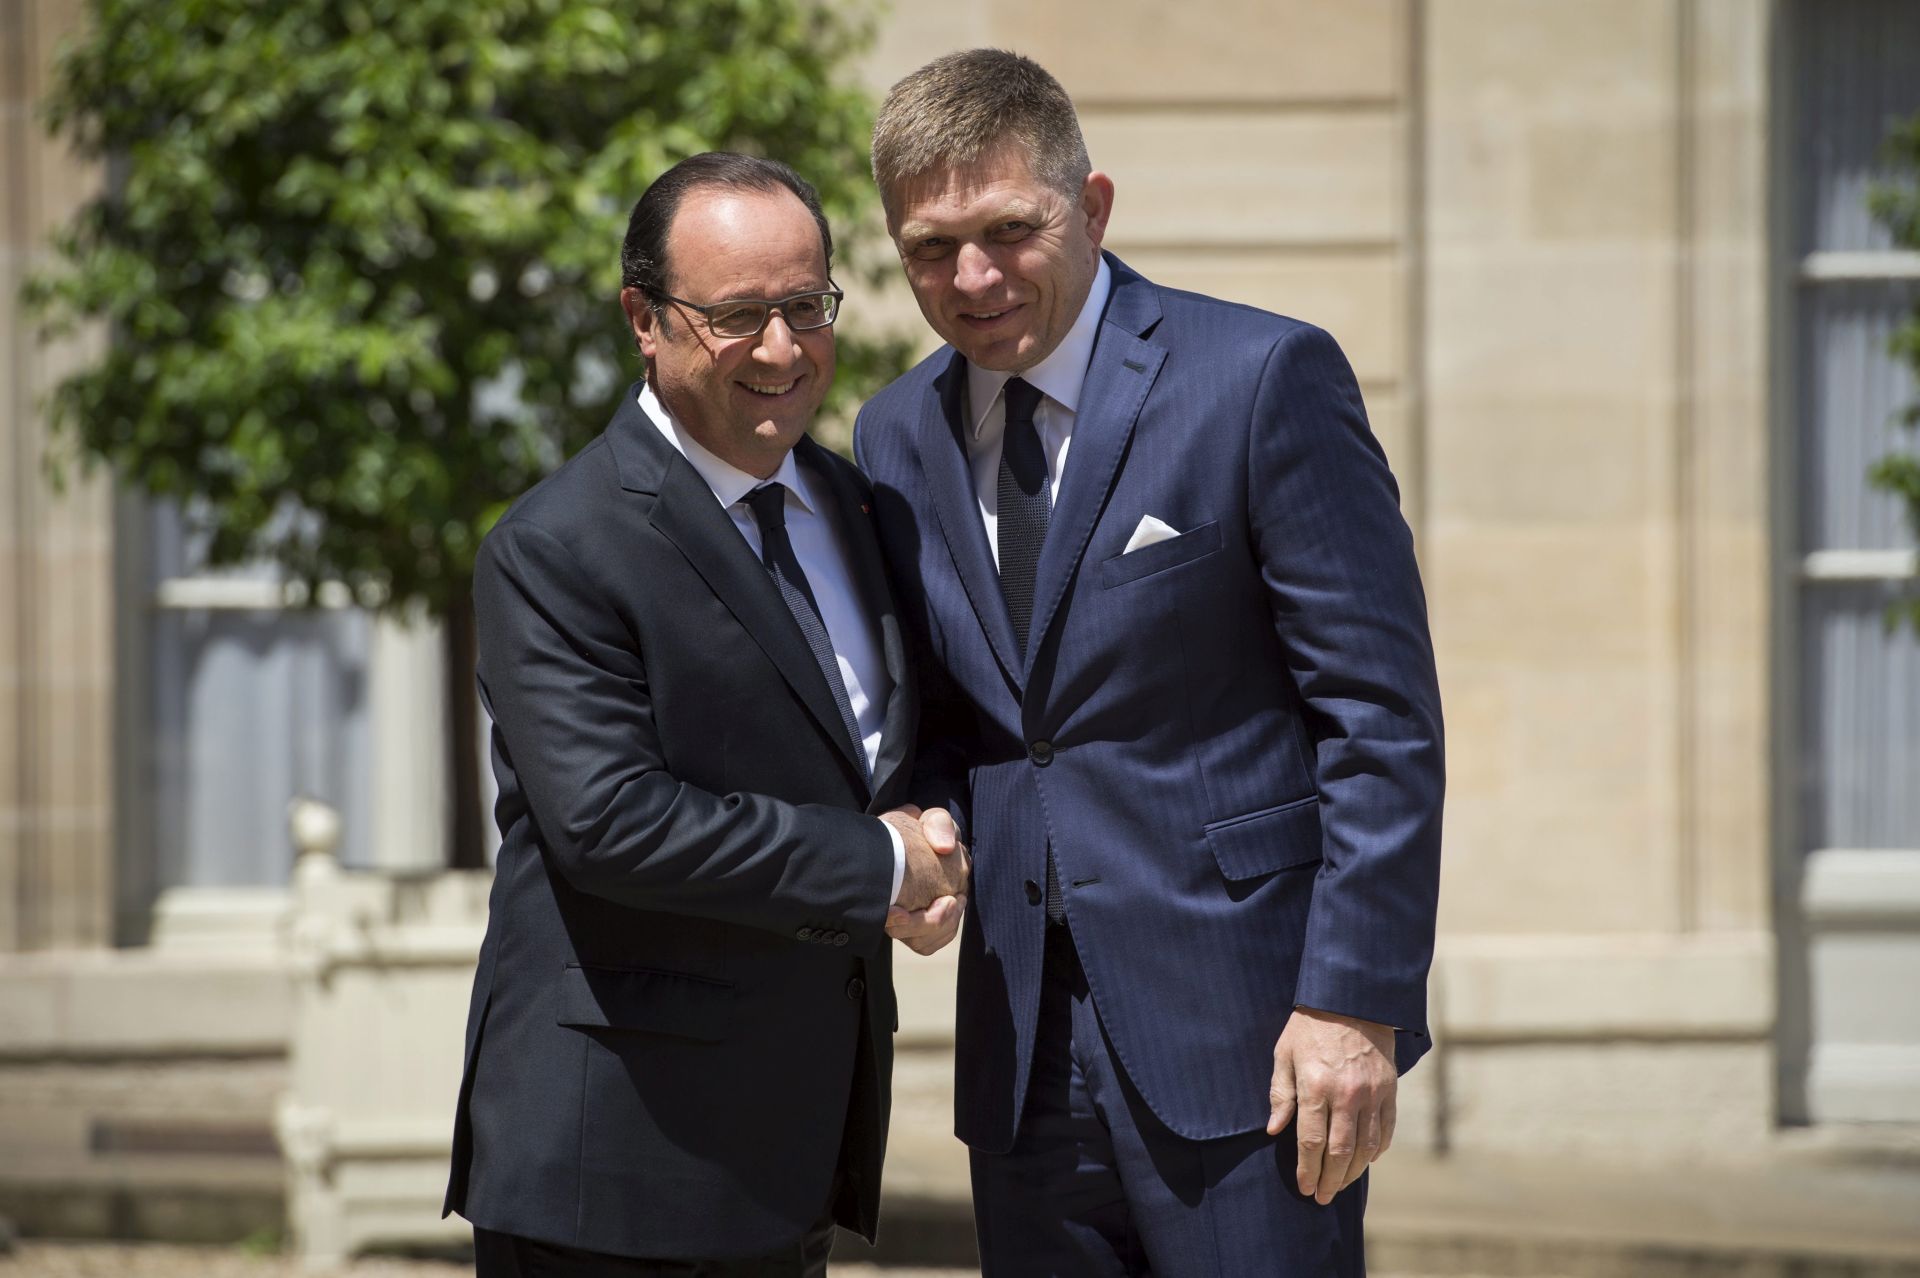 epa05383109 French President Francois Hollande (L) greets Slovak Prime Minister Robert Fico (R) prior to their meeting at the Elysee Palace in Paris, France, 22 June 2016.  EPA/JEREMY LEMPIN